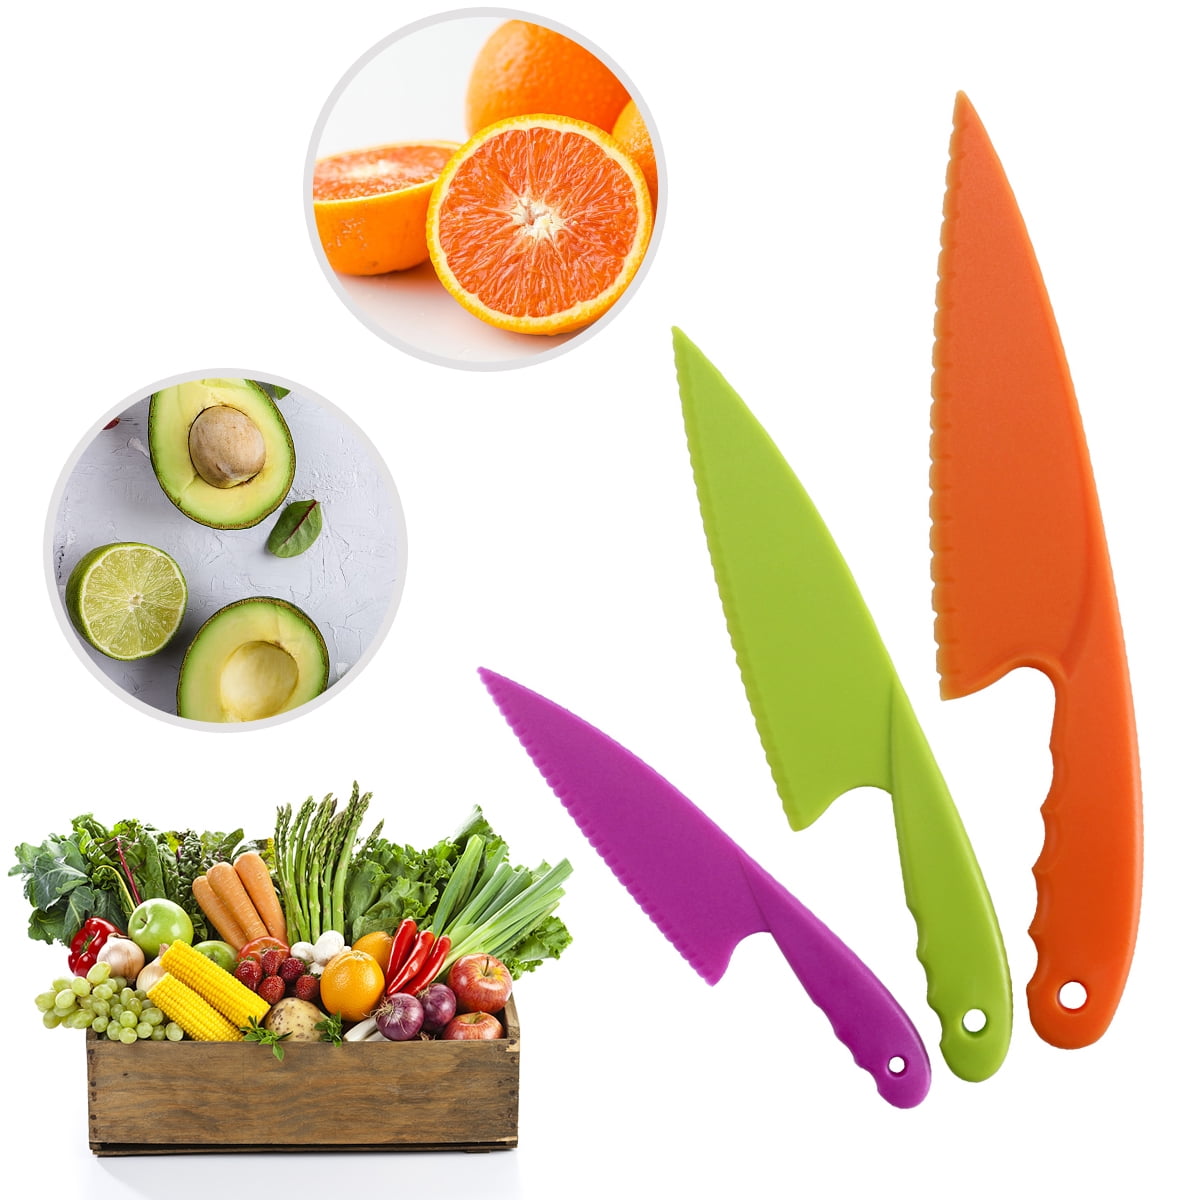 Kids Kitchen Cooking Knives in 3 Sizes and Colors Lettuce and Salad Knives 